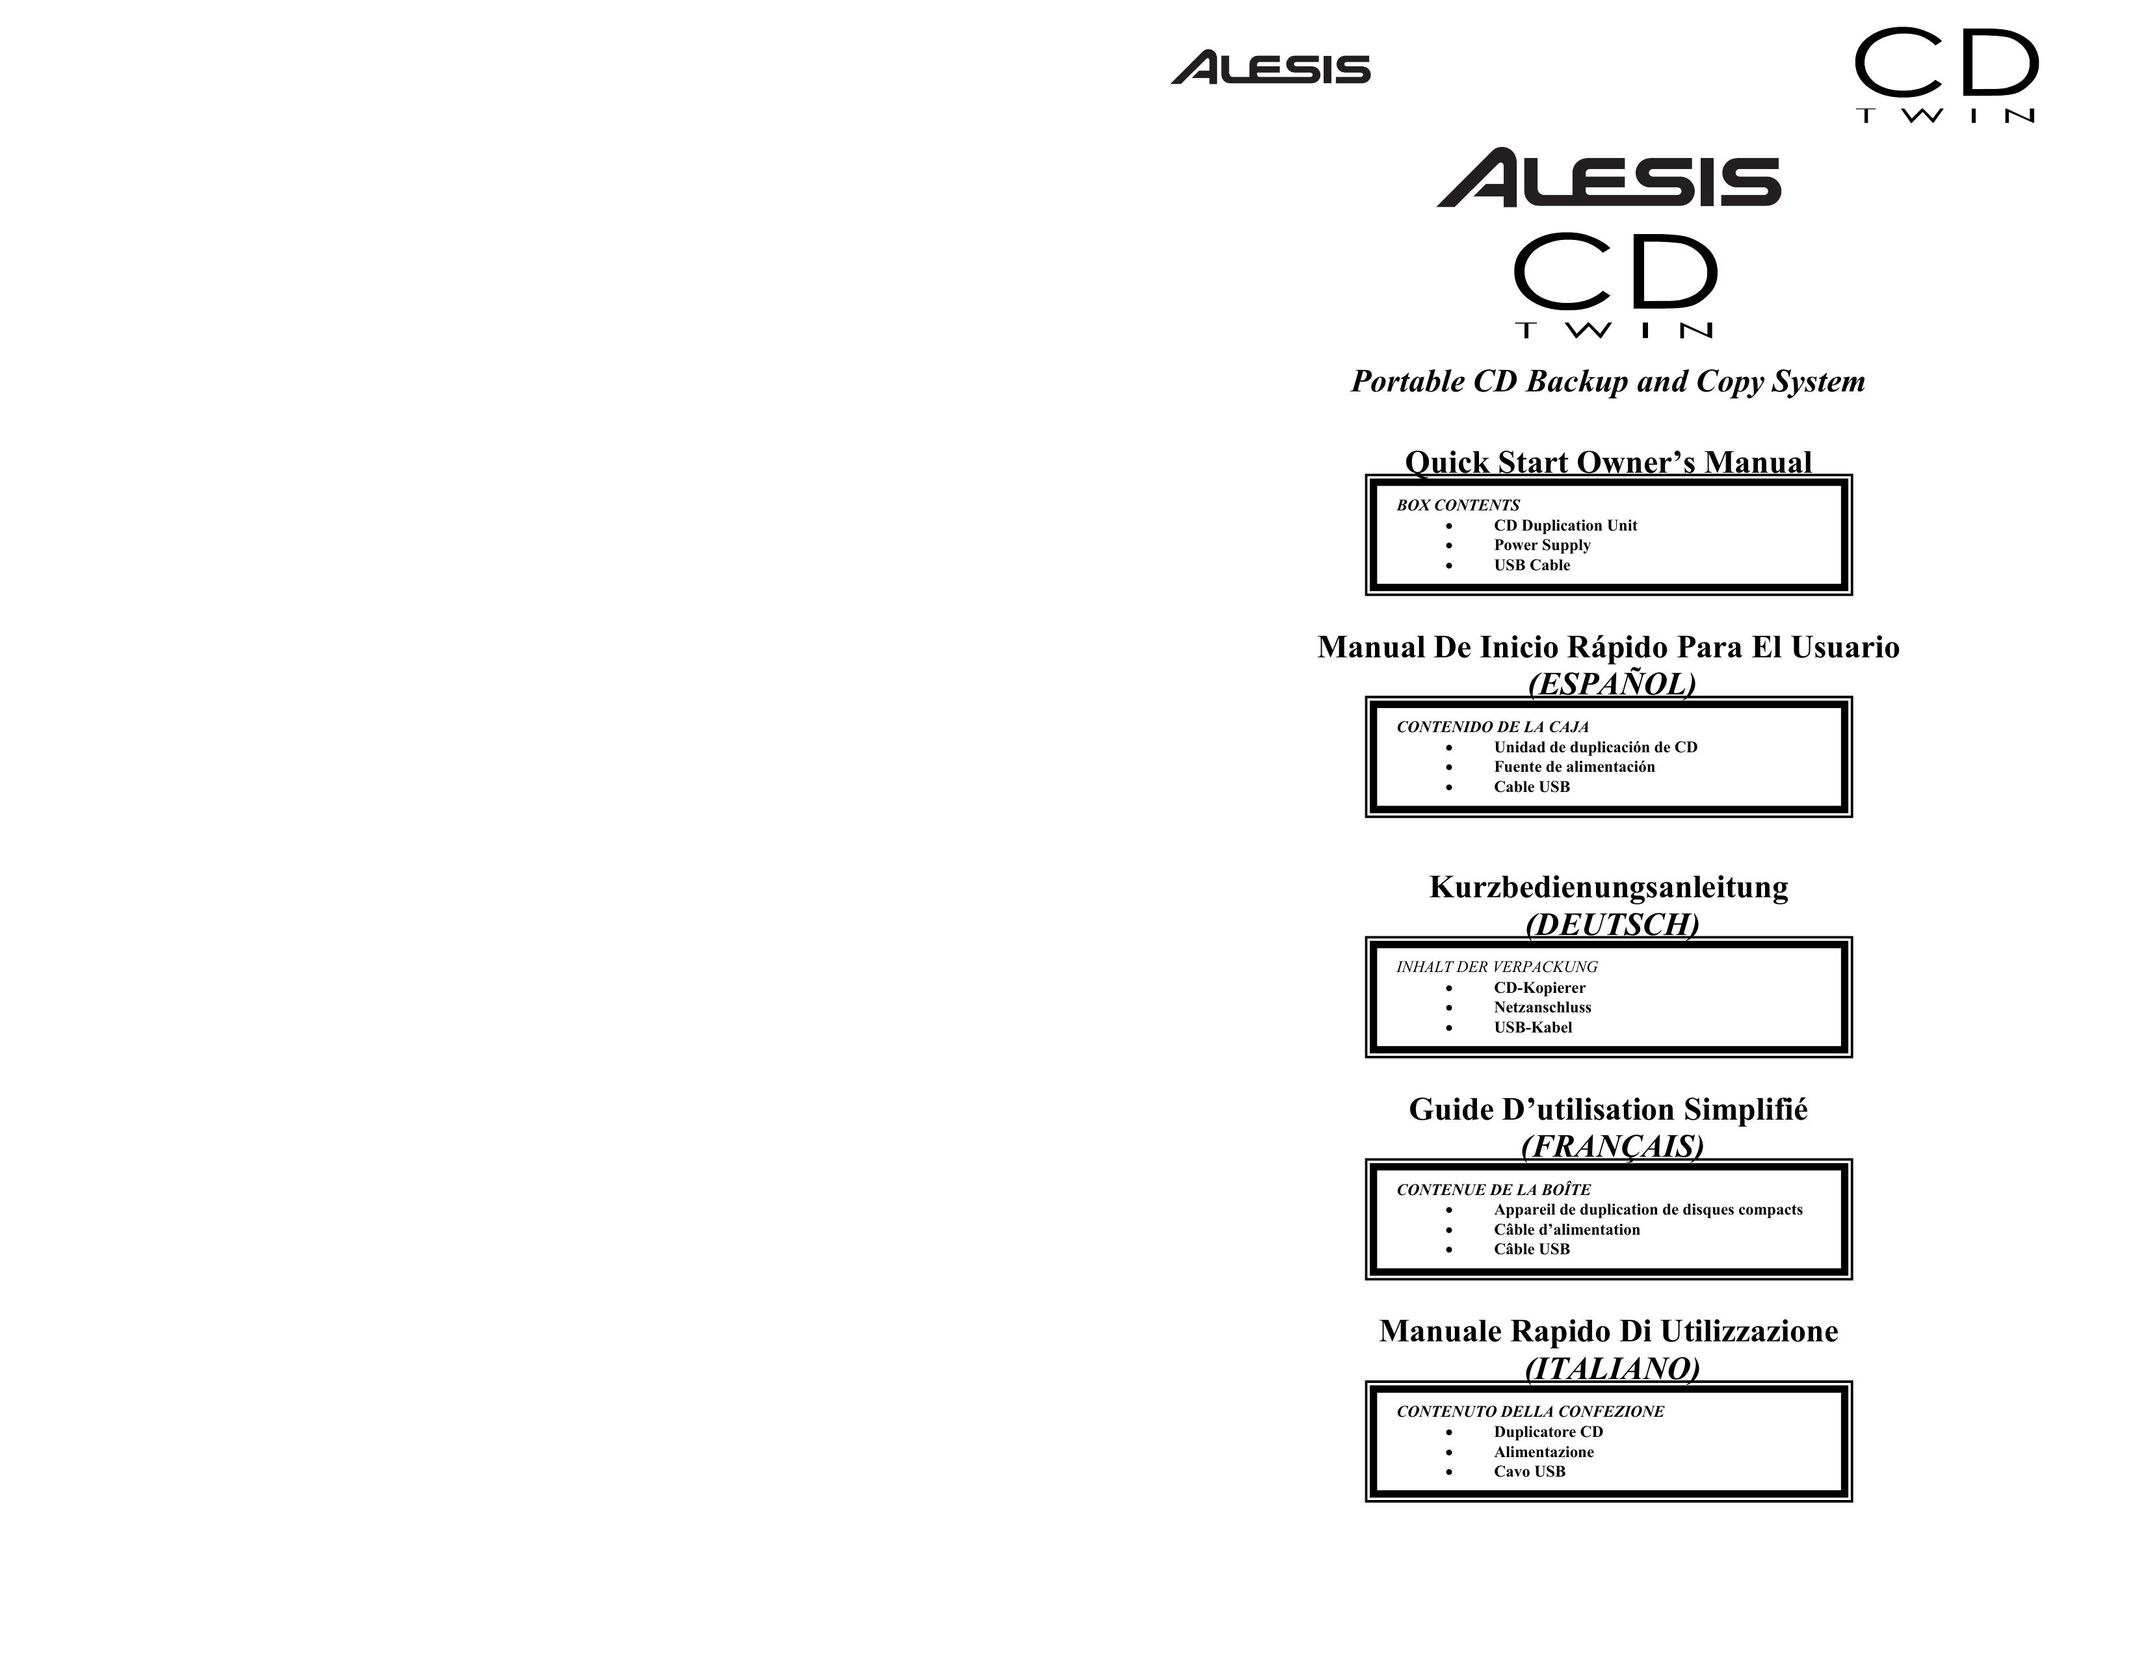 Alesis CD Twin Portable CD Backup and Copy System CD Player User Manual